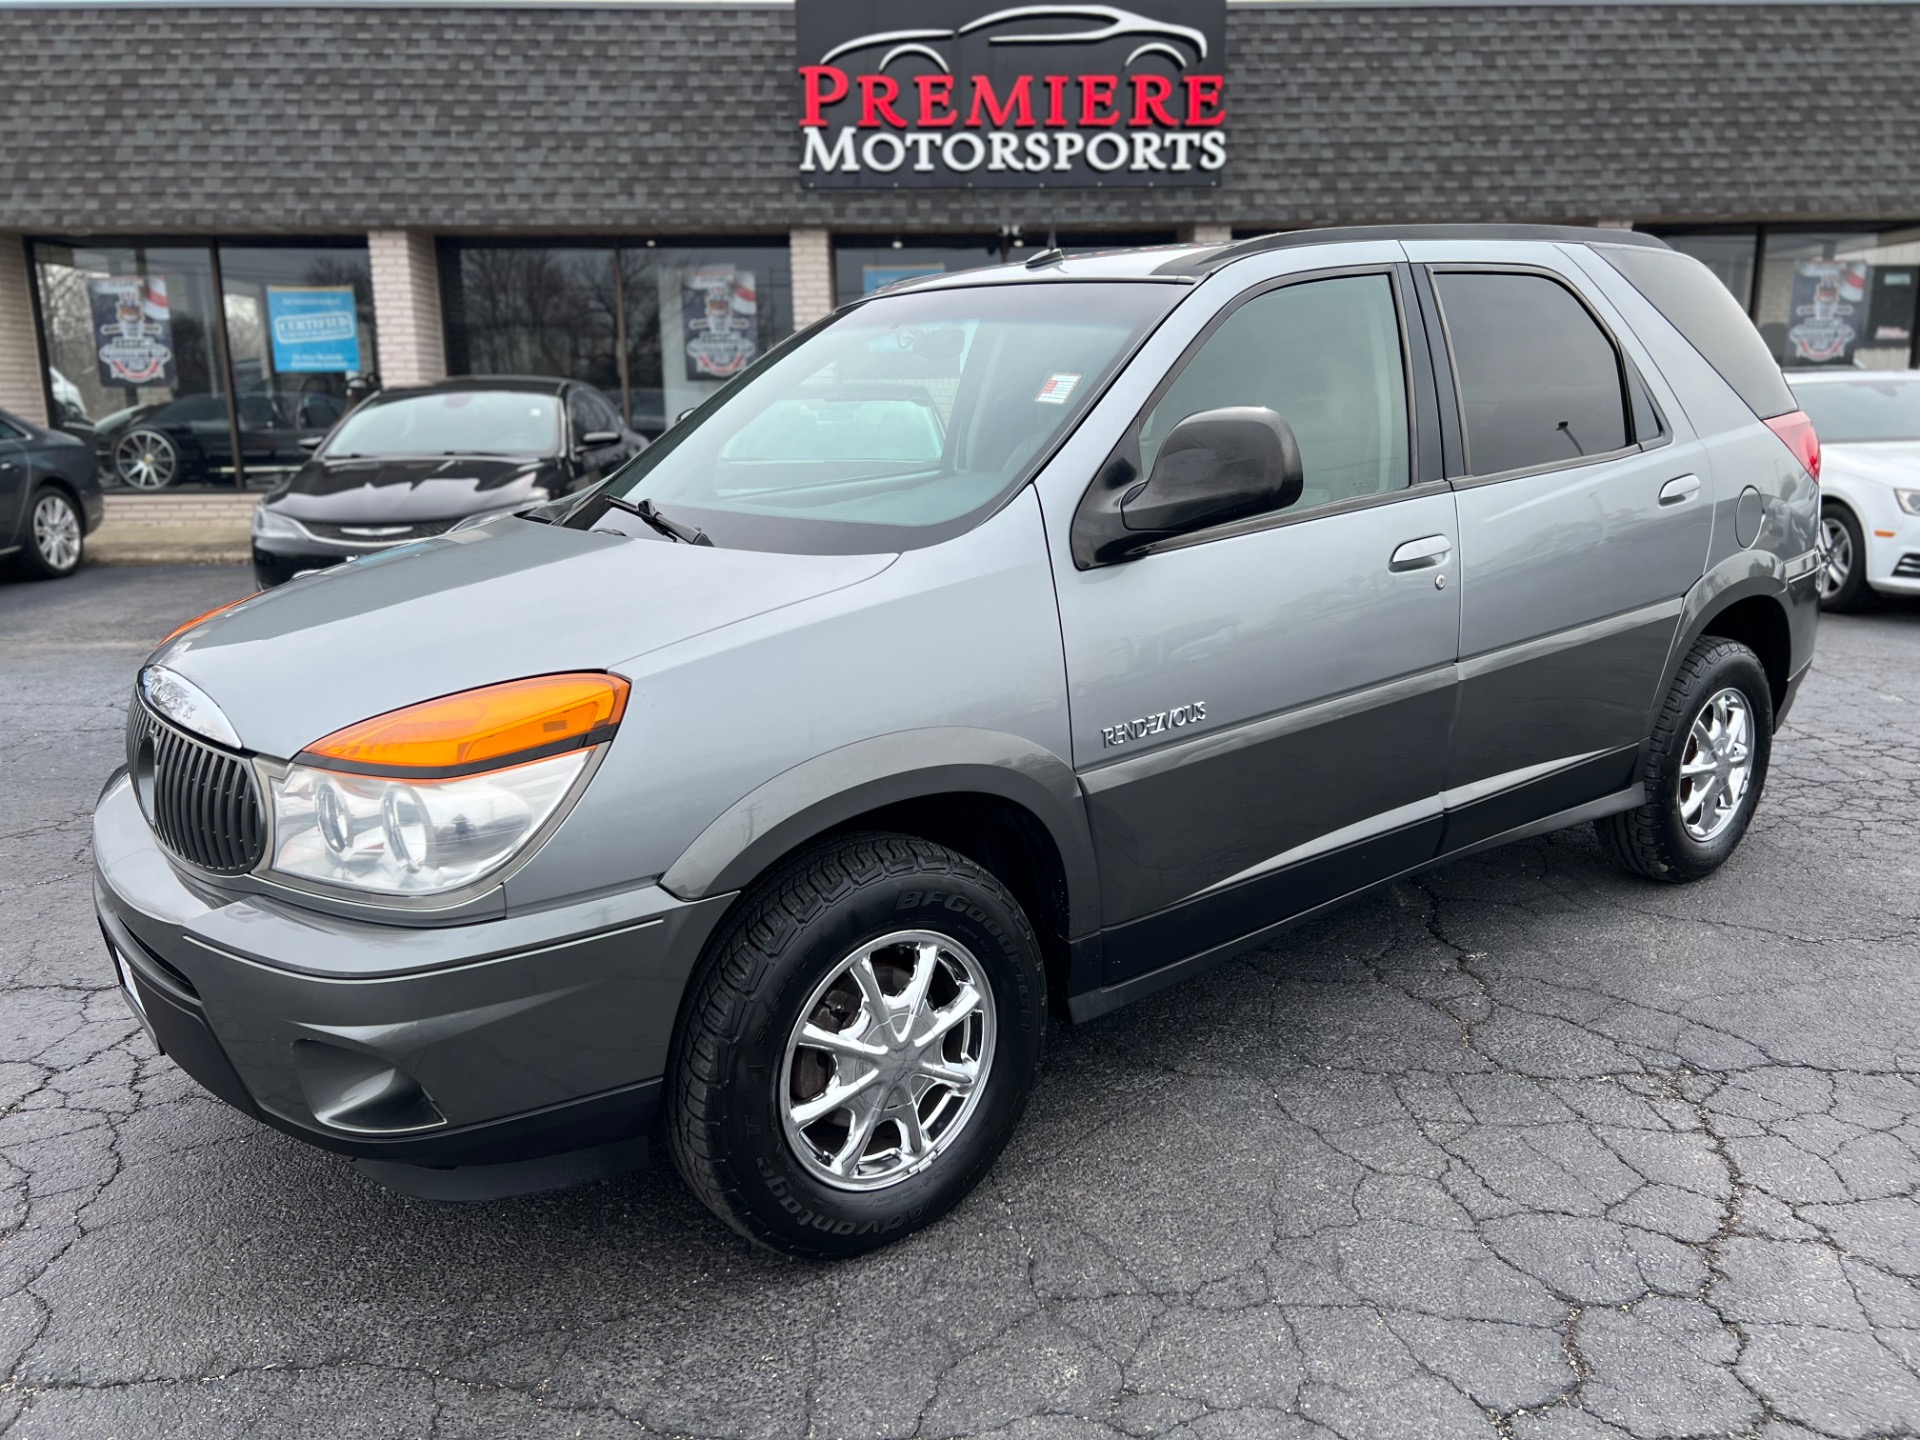 Used Buick Rendezvous' nationwide for sale - MotorCloud